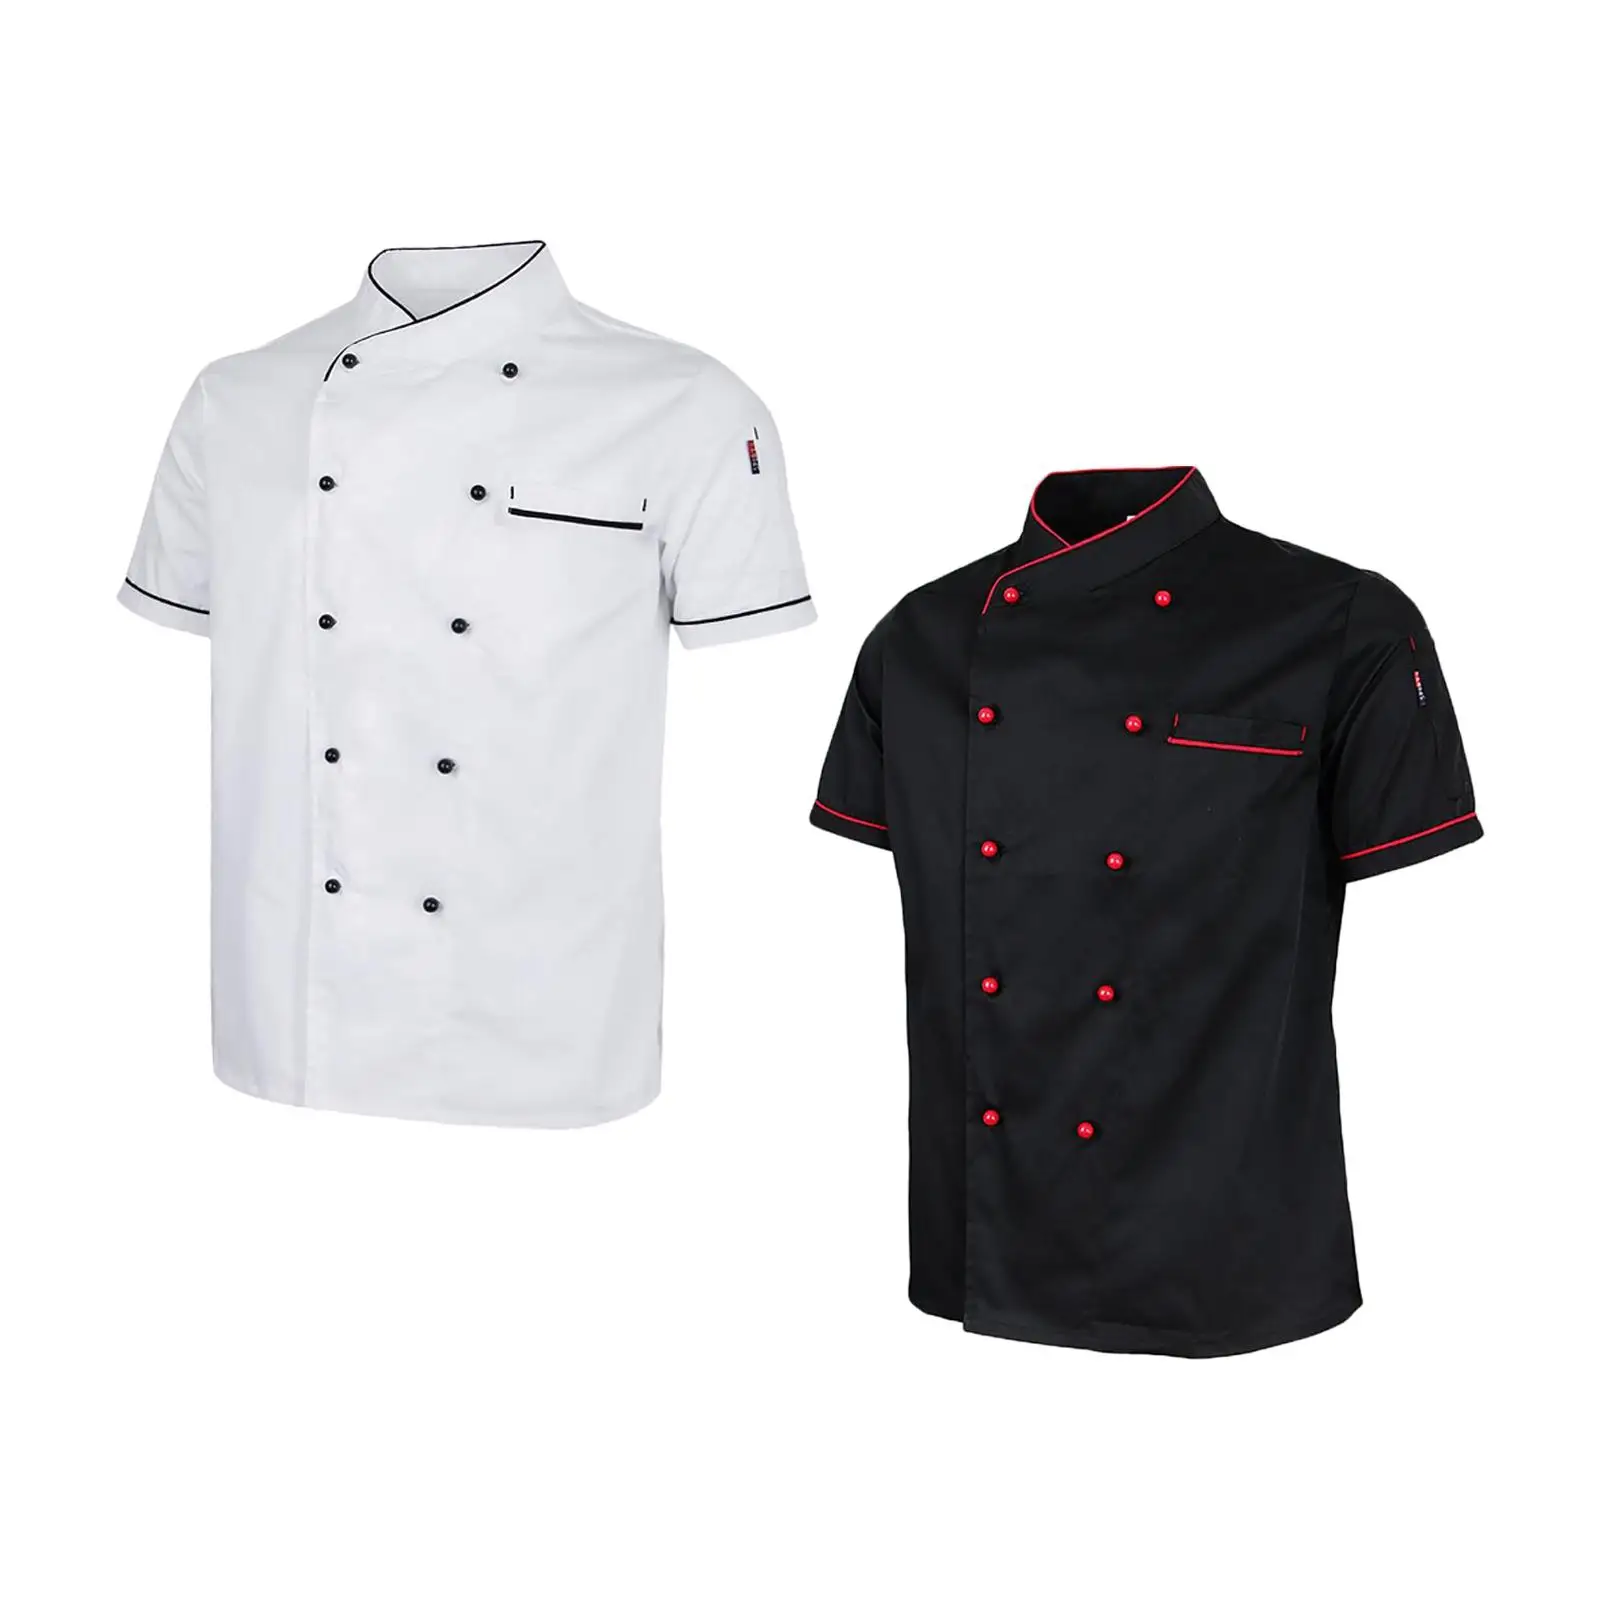 Unisex Chef Jacket Food Service Short Sleeve Breathable Executive Uniform Clothes Chef Coat for Catering Waiter Hotel Restaurant